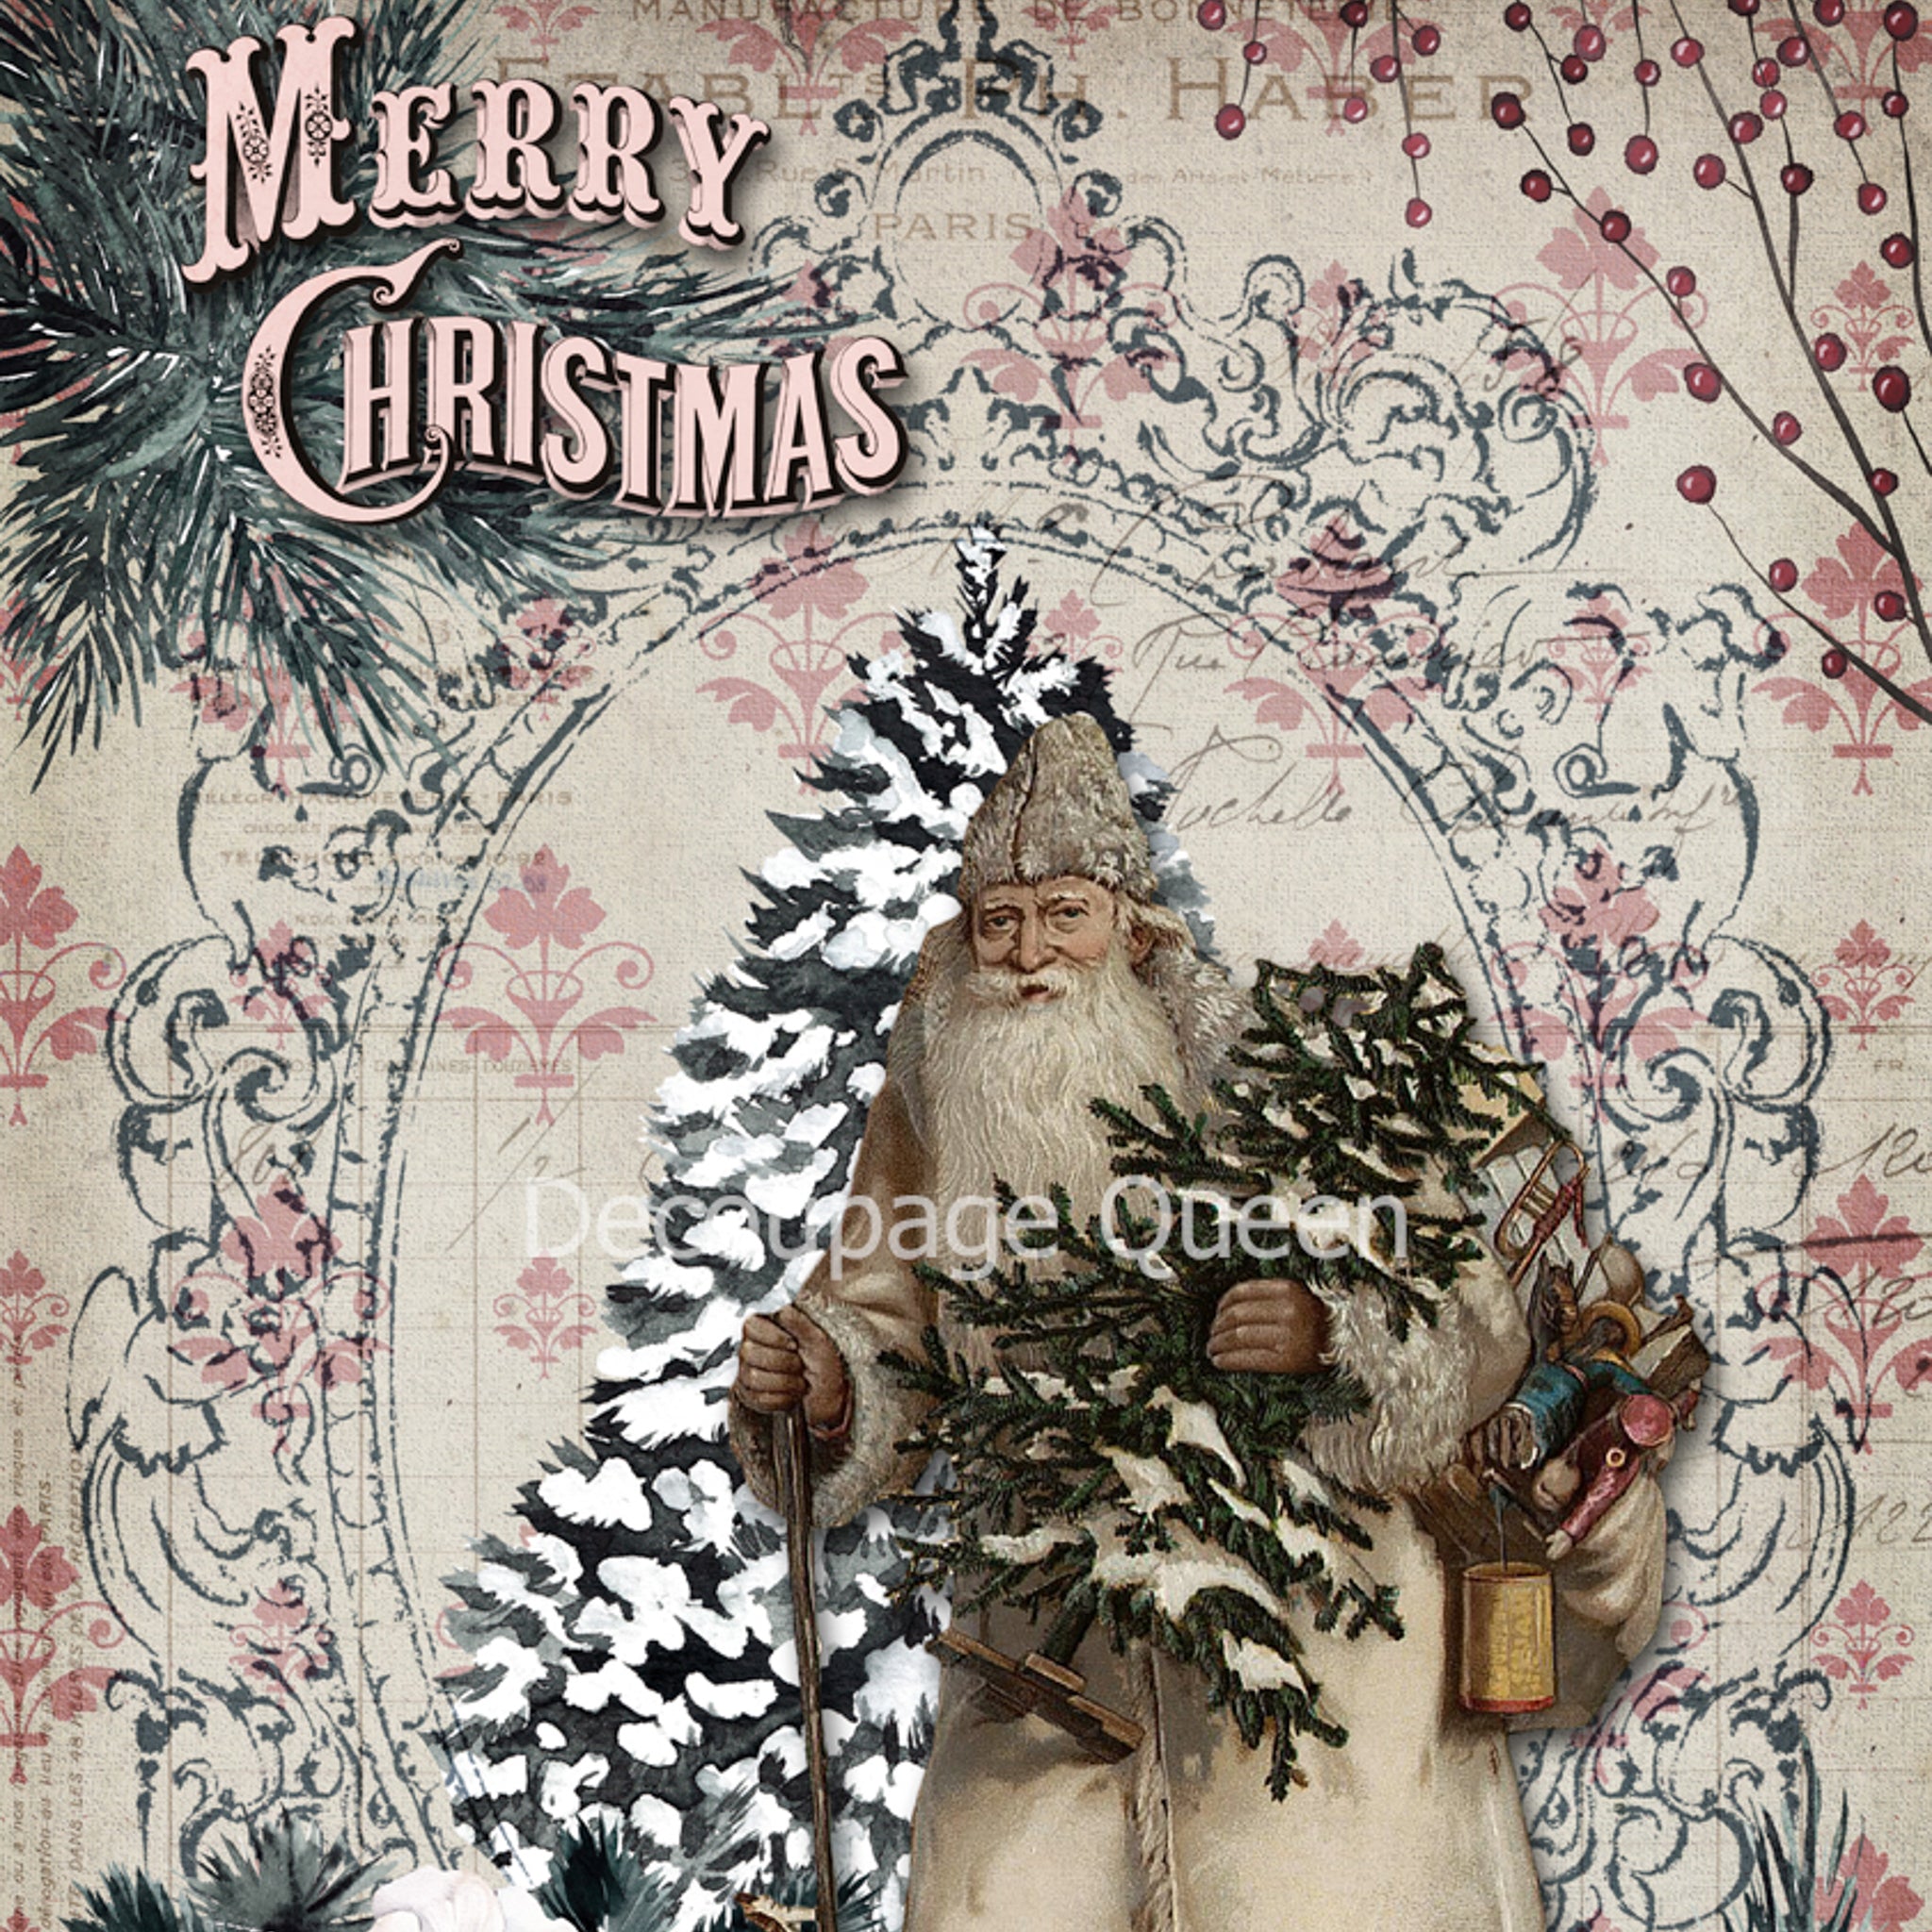 A3 rice paper design of a vintage Santa on a background with a snow covered pine tree and vintage floral wallpaper design.